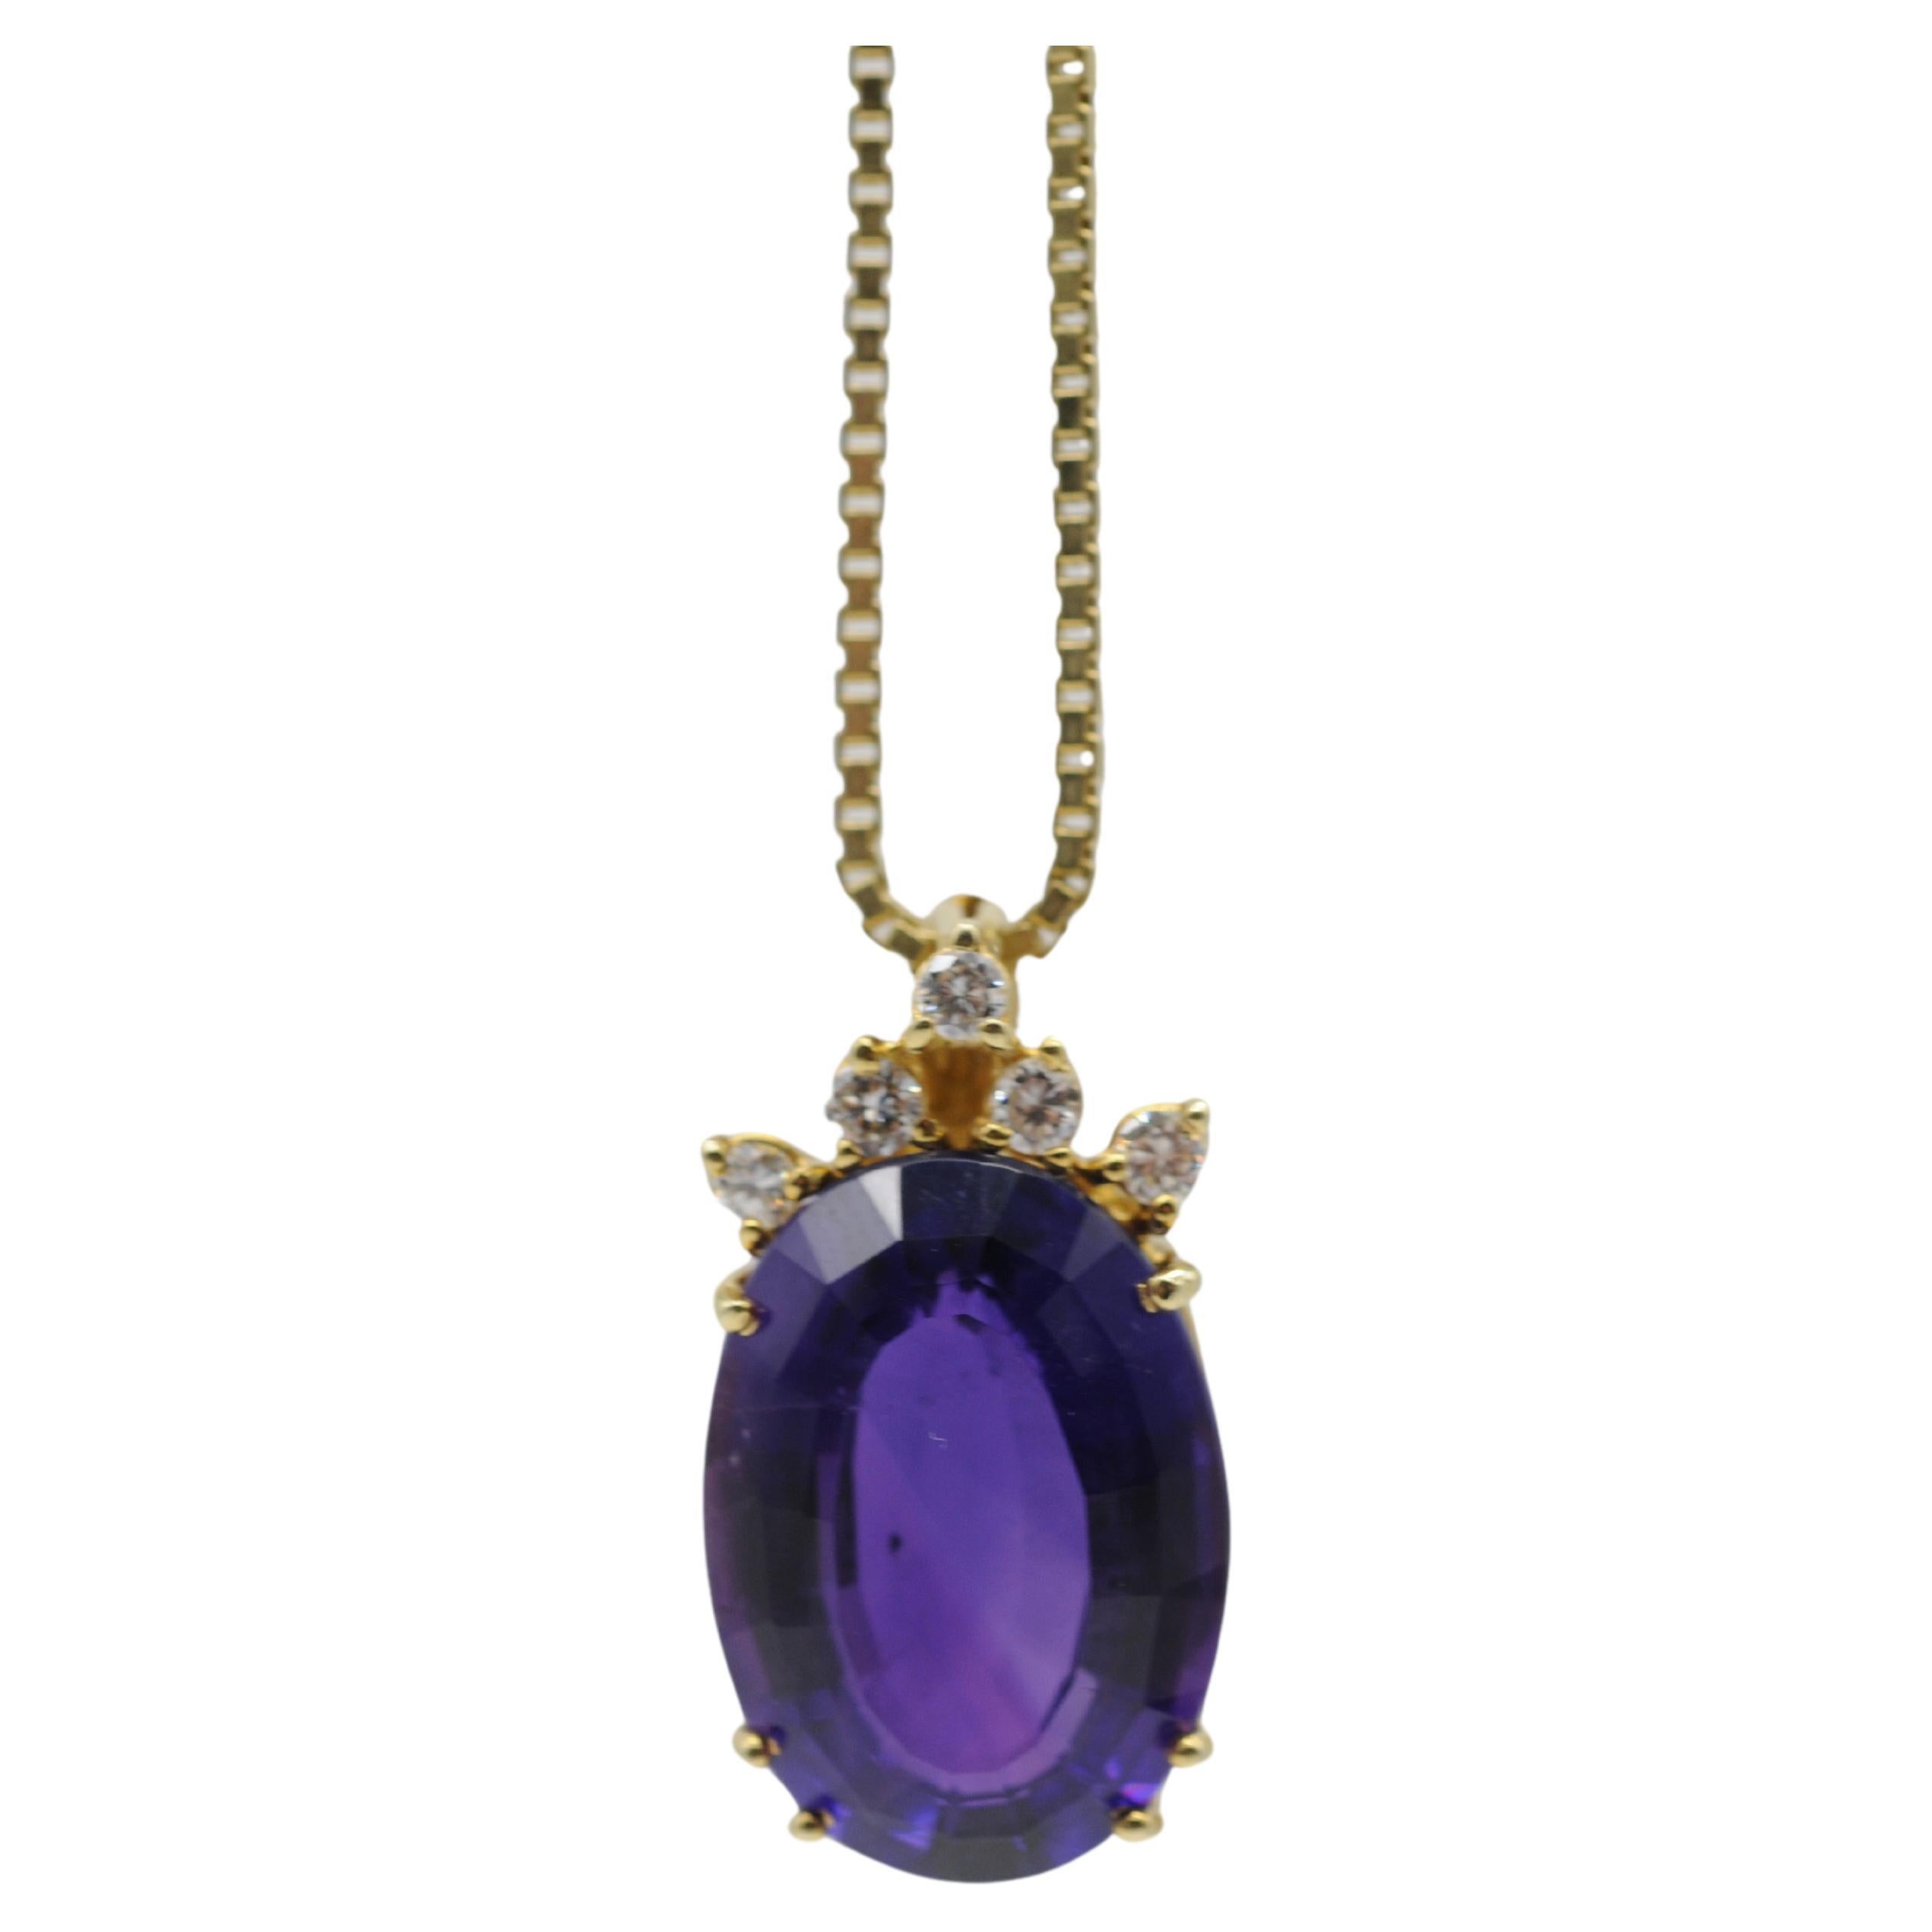 Aesthetic Movement Art deco necklace with amethyst and diamonds For Sale